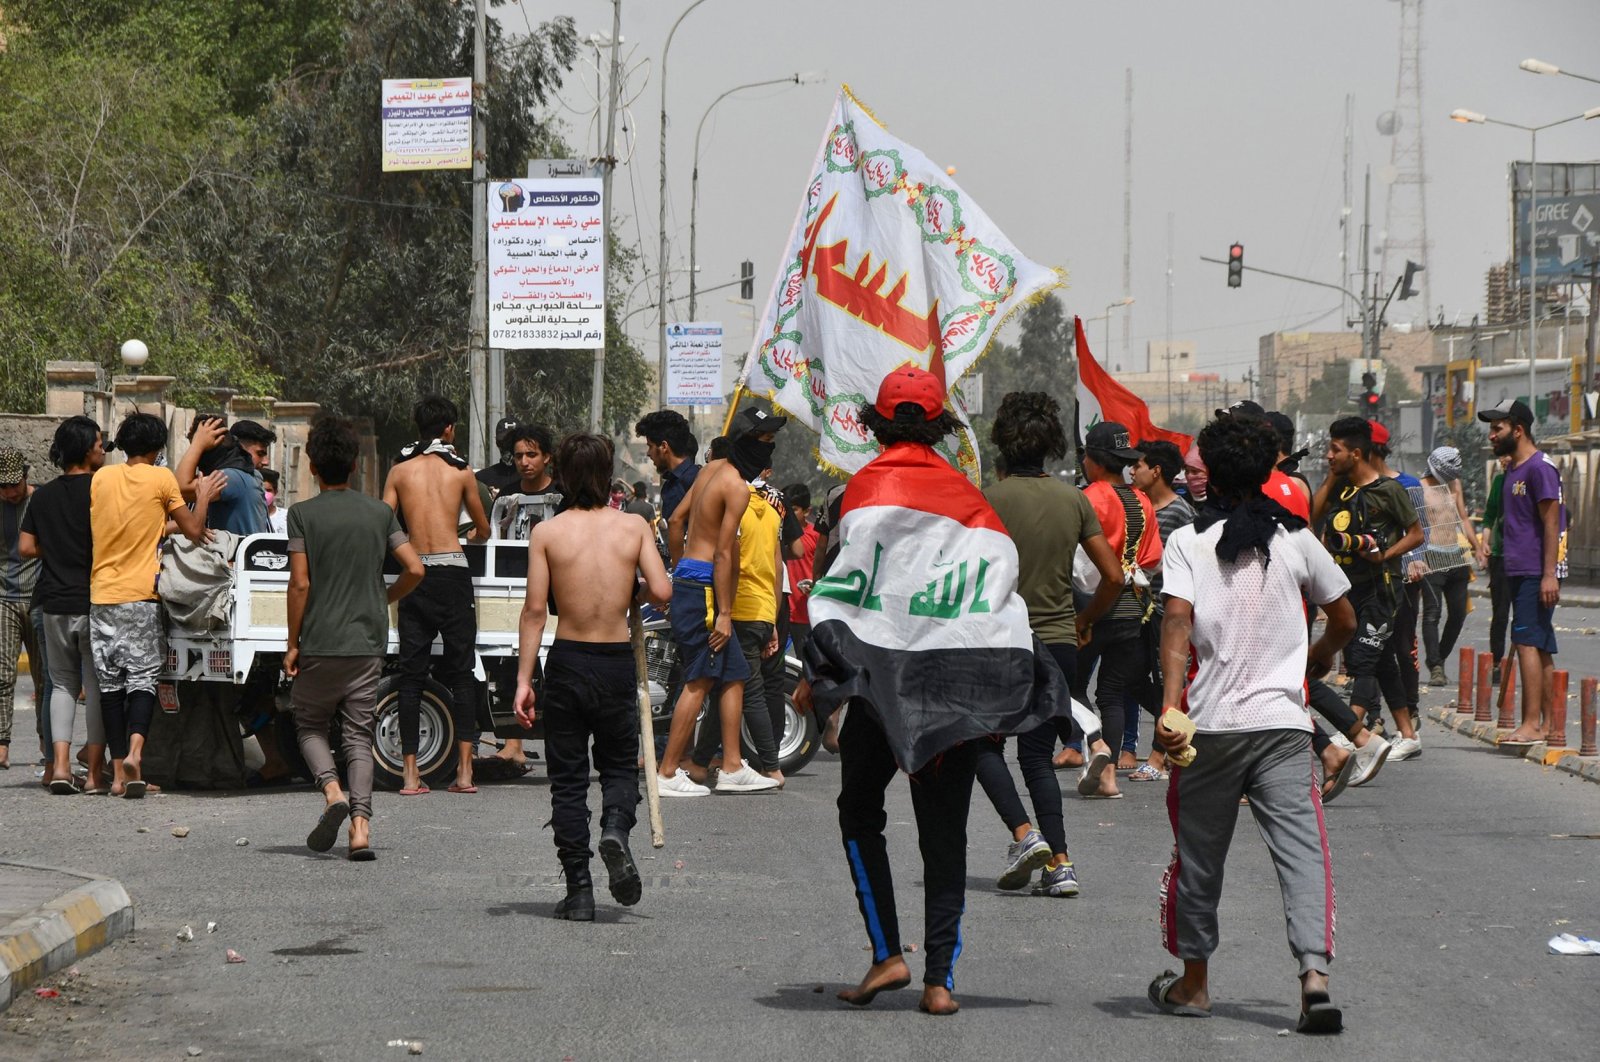 Iraqi protesters gather to block a street during an anti-government demonstration in Iraq's southern city of Nasiriyah, Dhi Qar province, May 10, 2020. (AFP Photo)